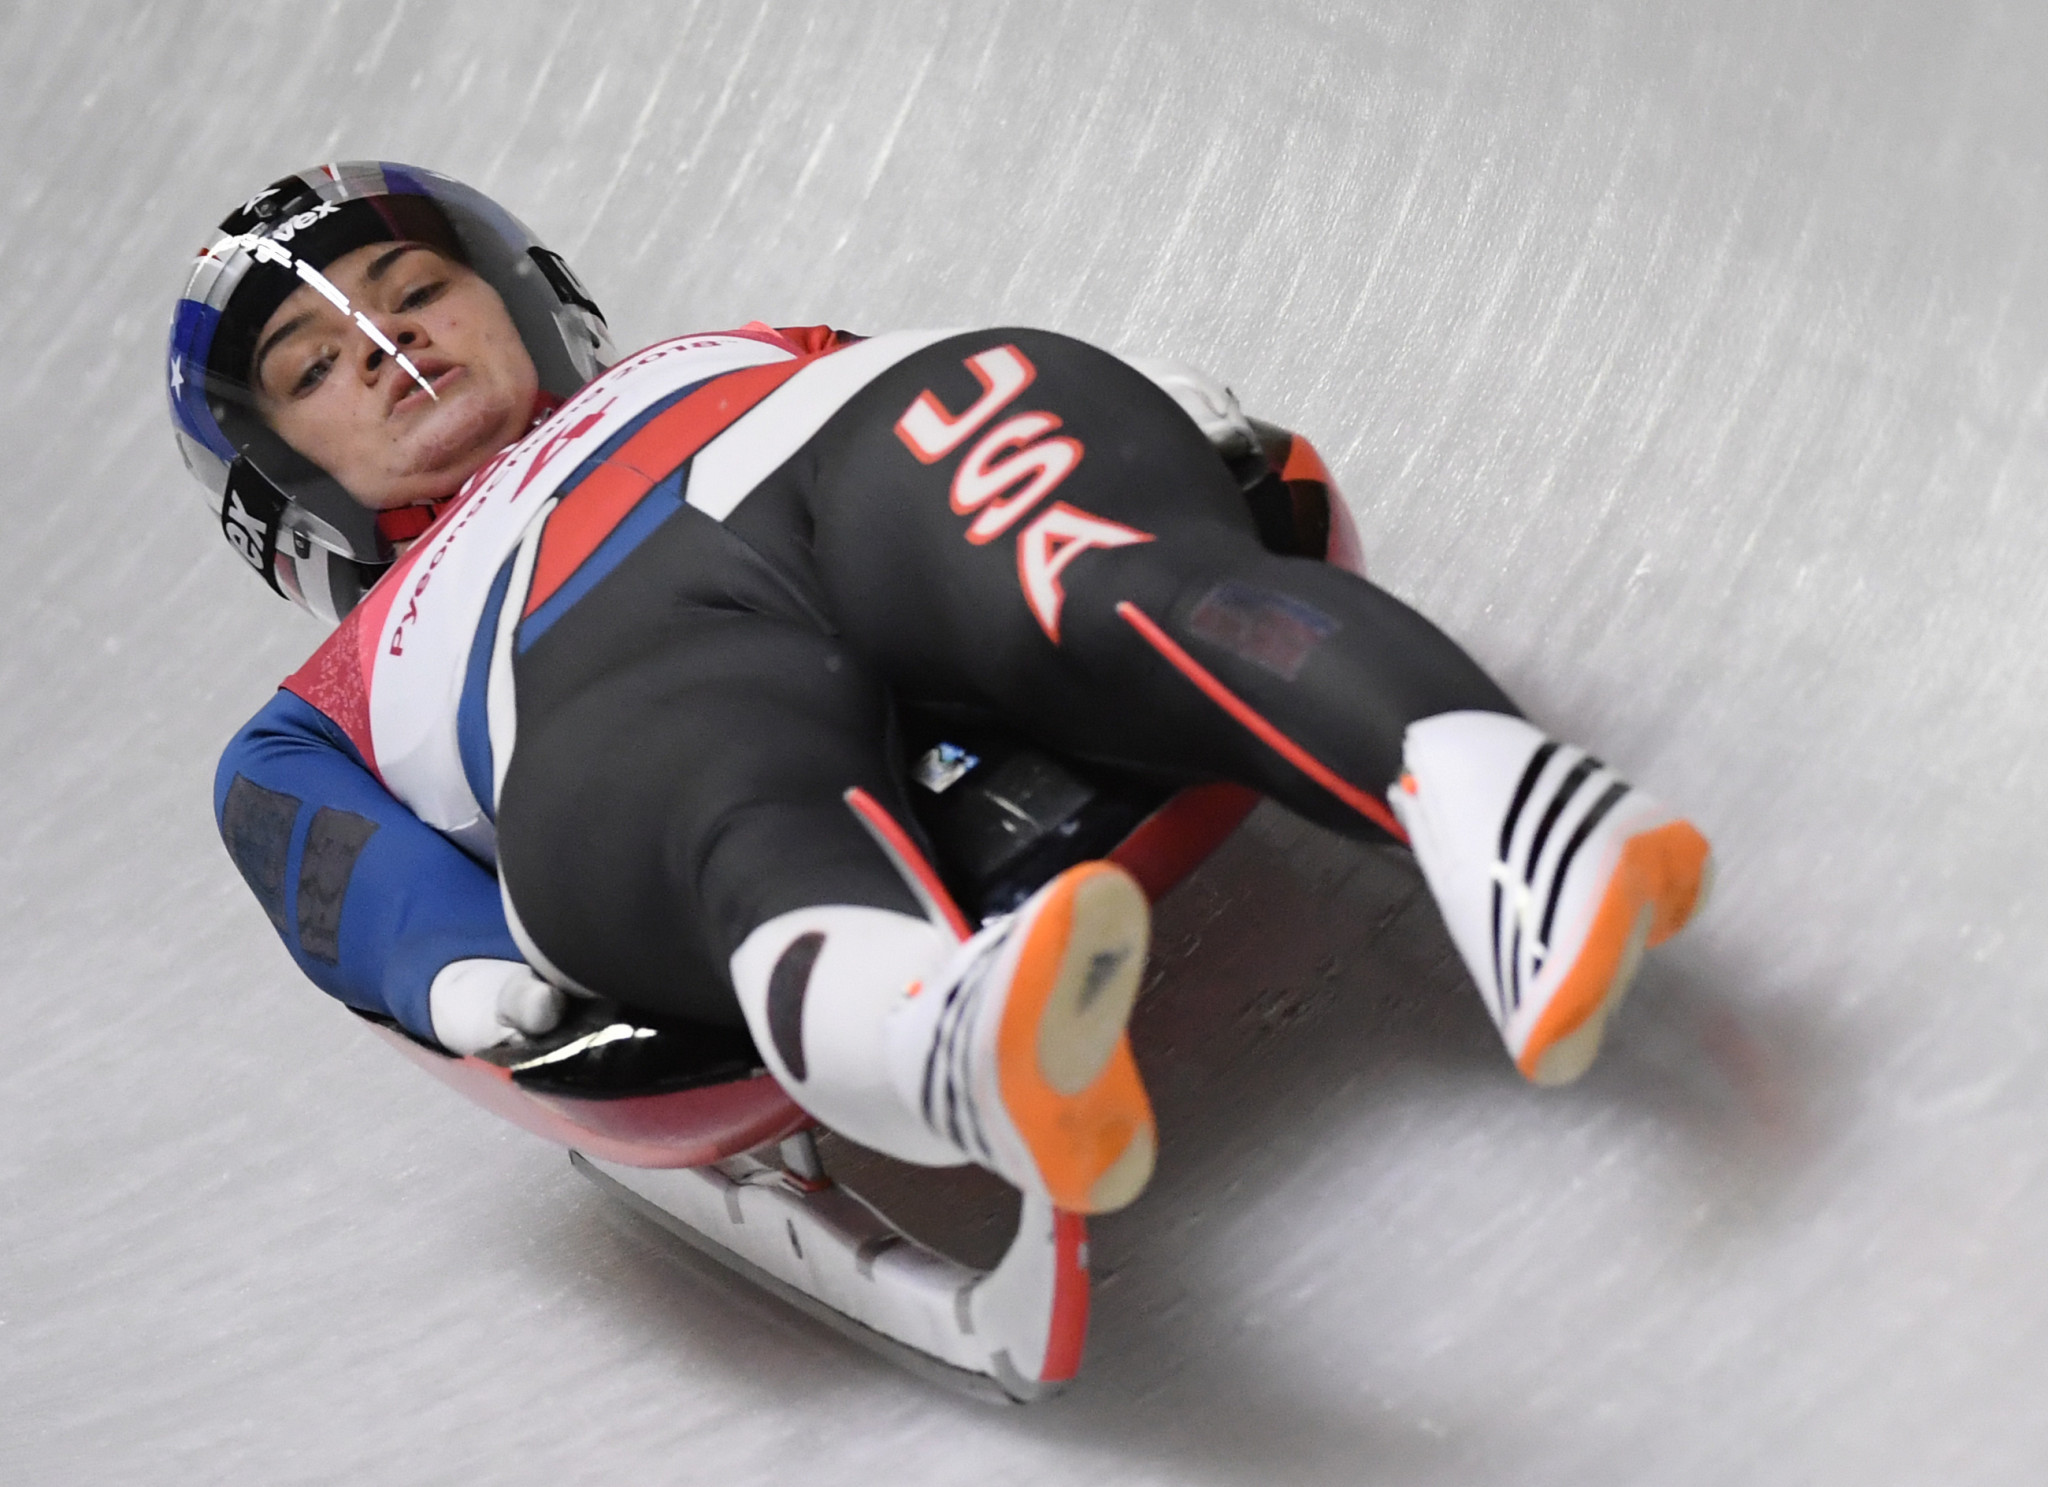 USA Luge have made progress during the COVID-19 pandemic ©Getty Images